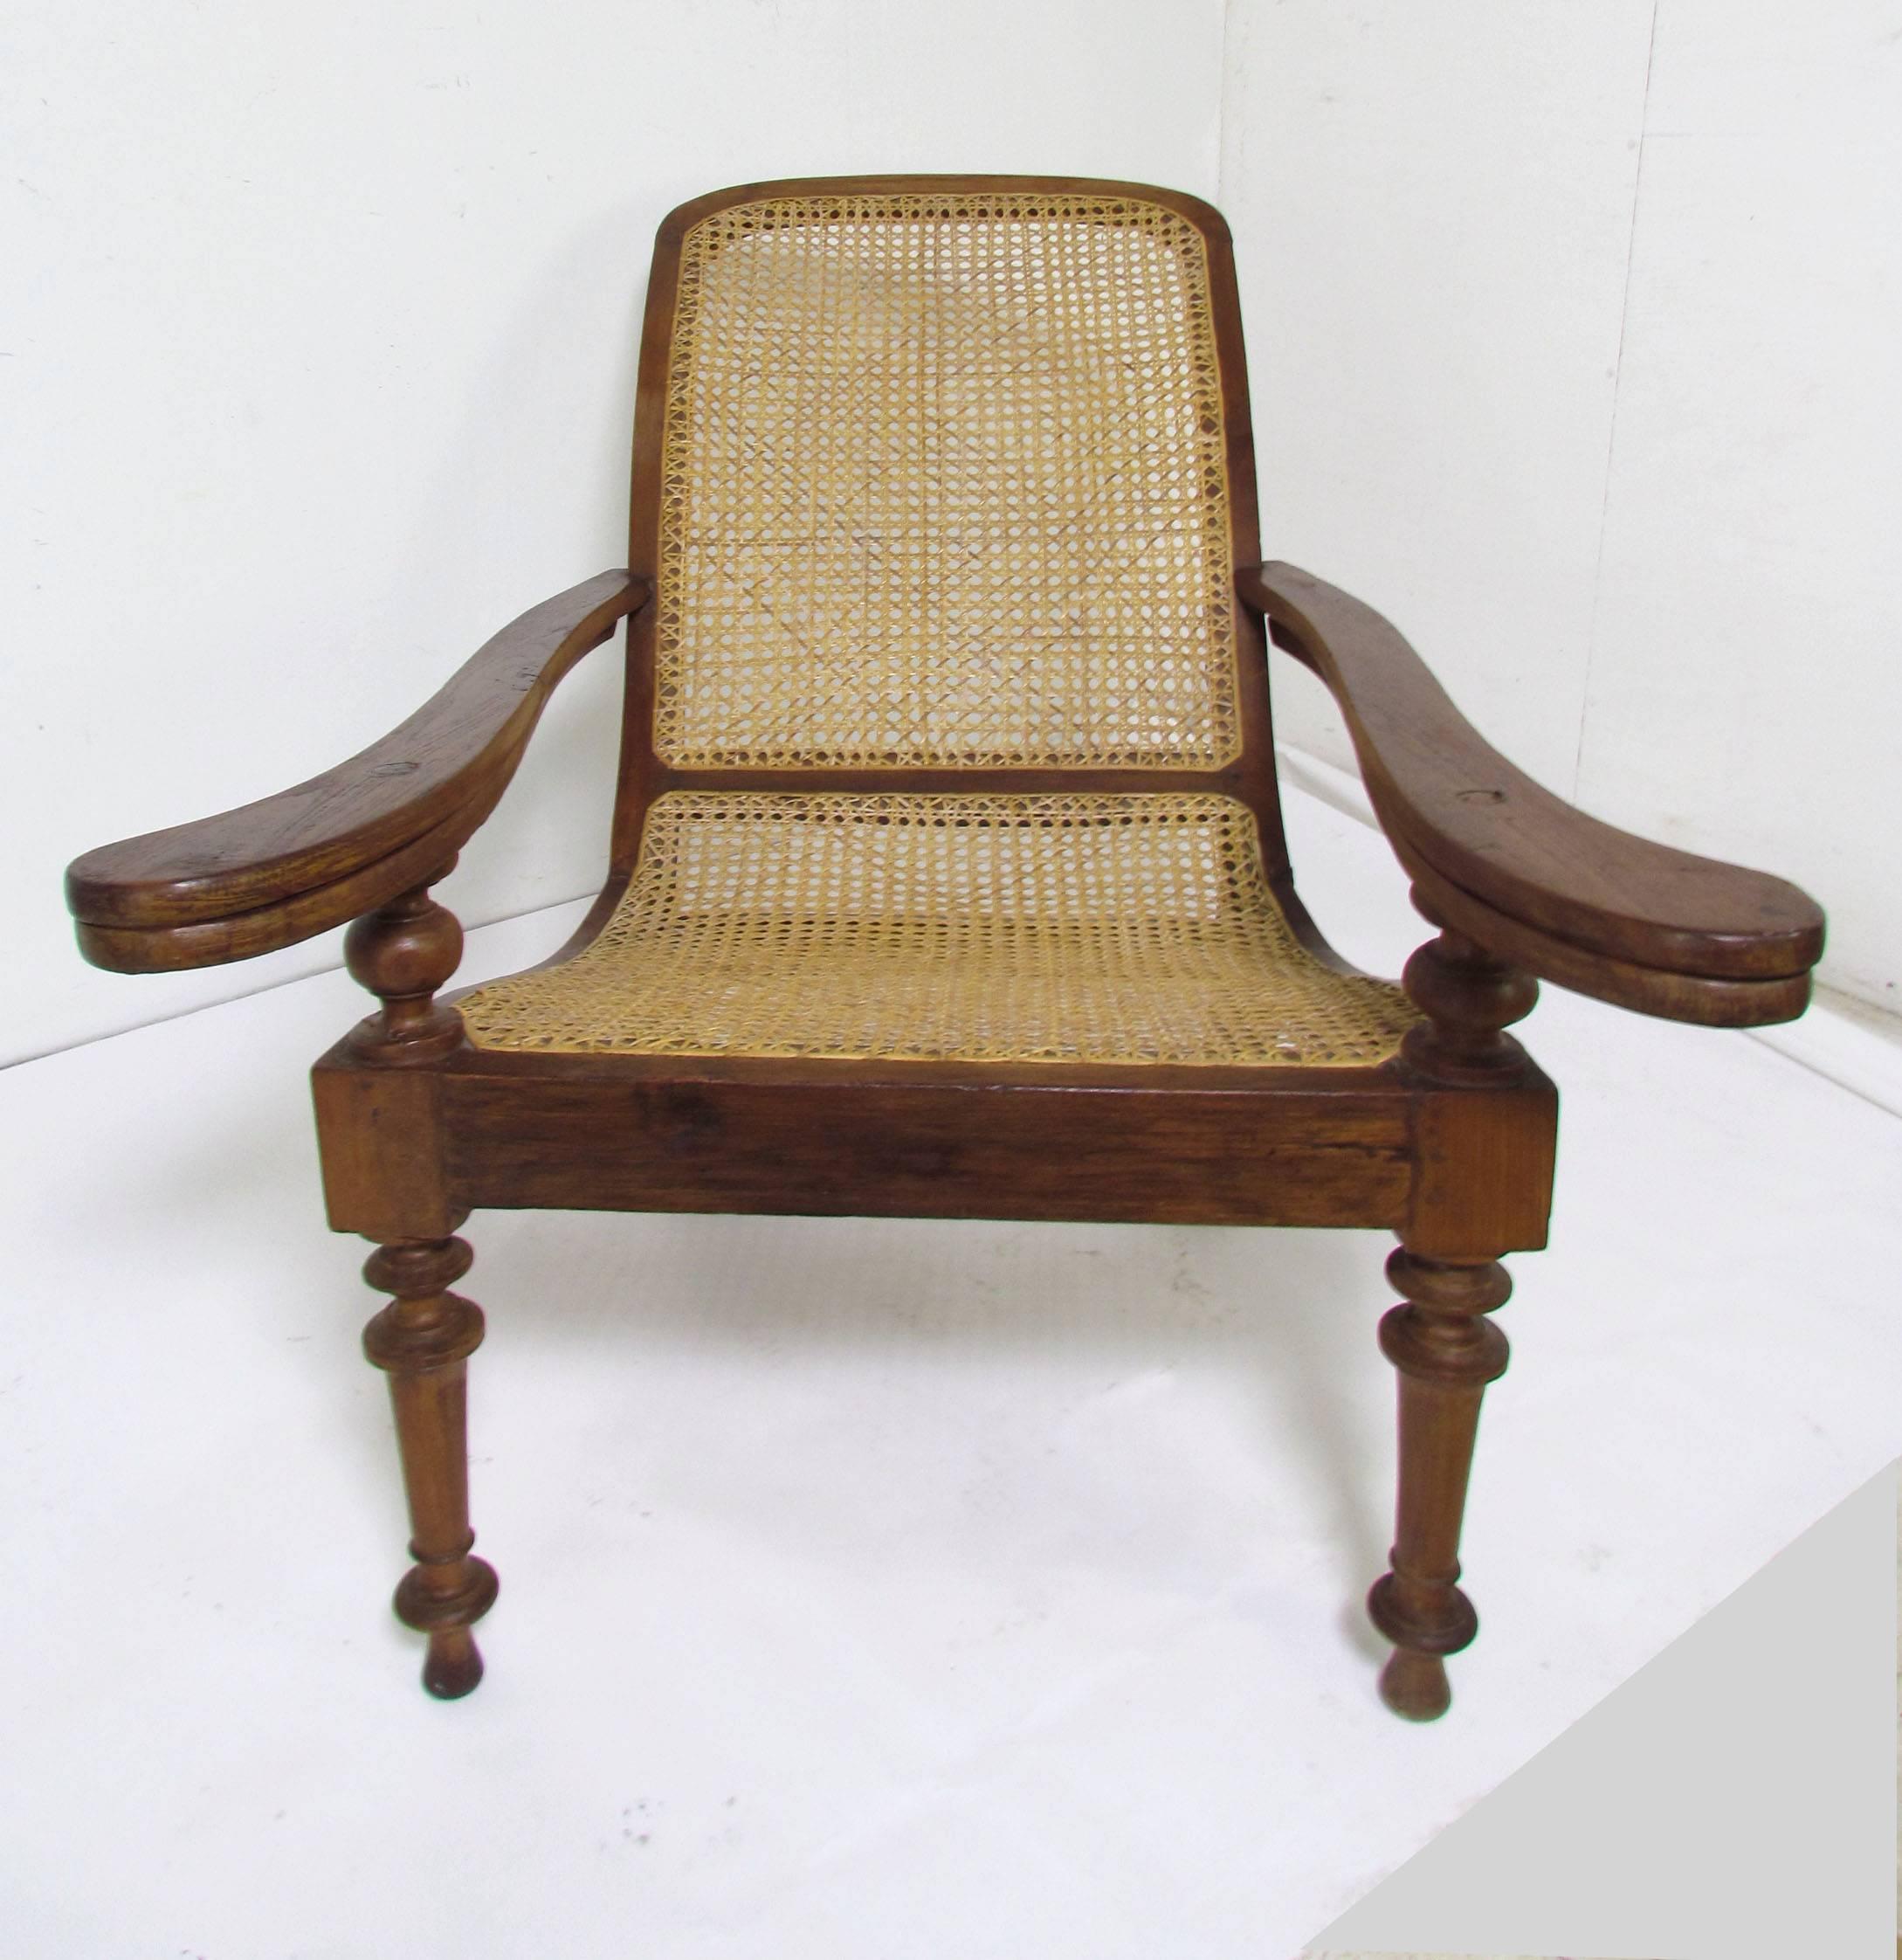 plantation chair with swivel arms